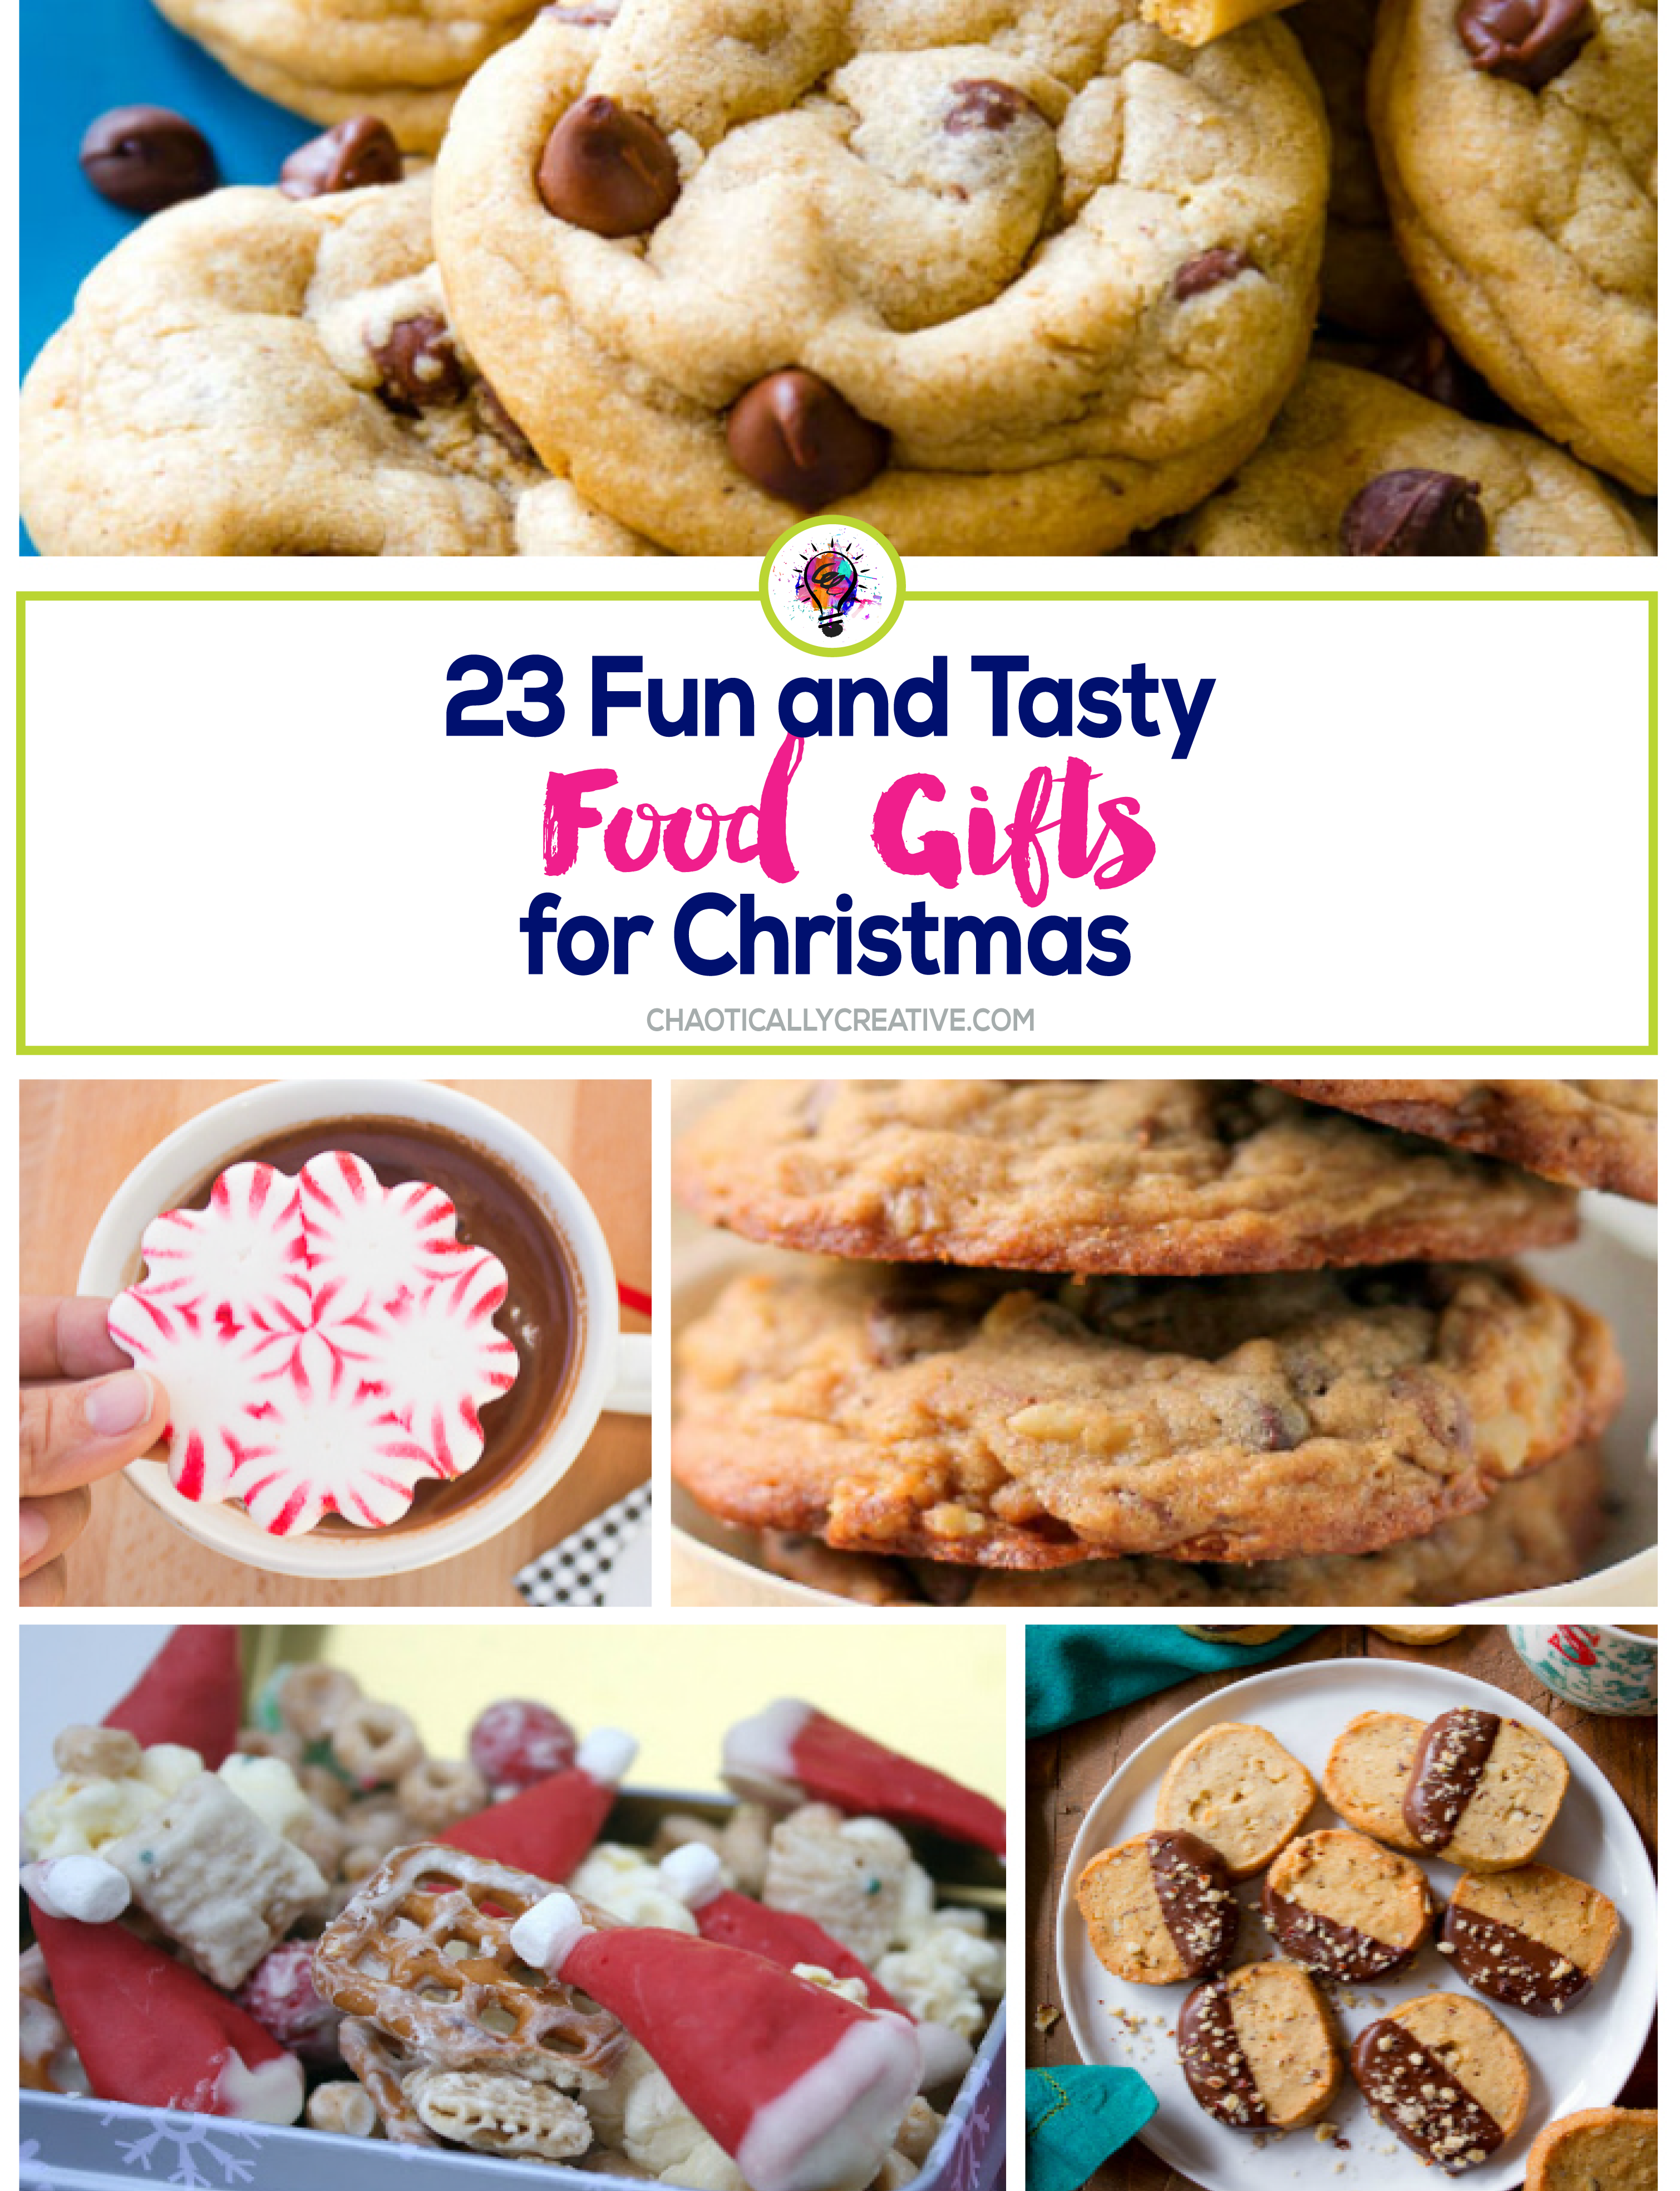 23 Fun and Tasty Food Gifts For Christmas - Chaotically Creative